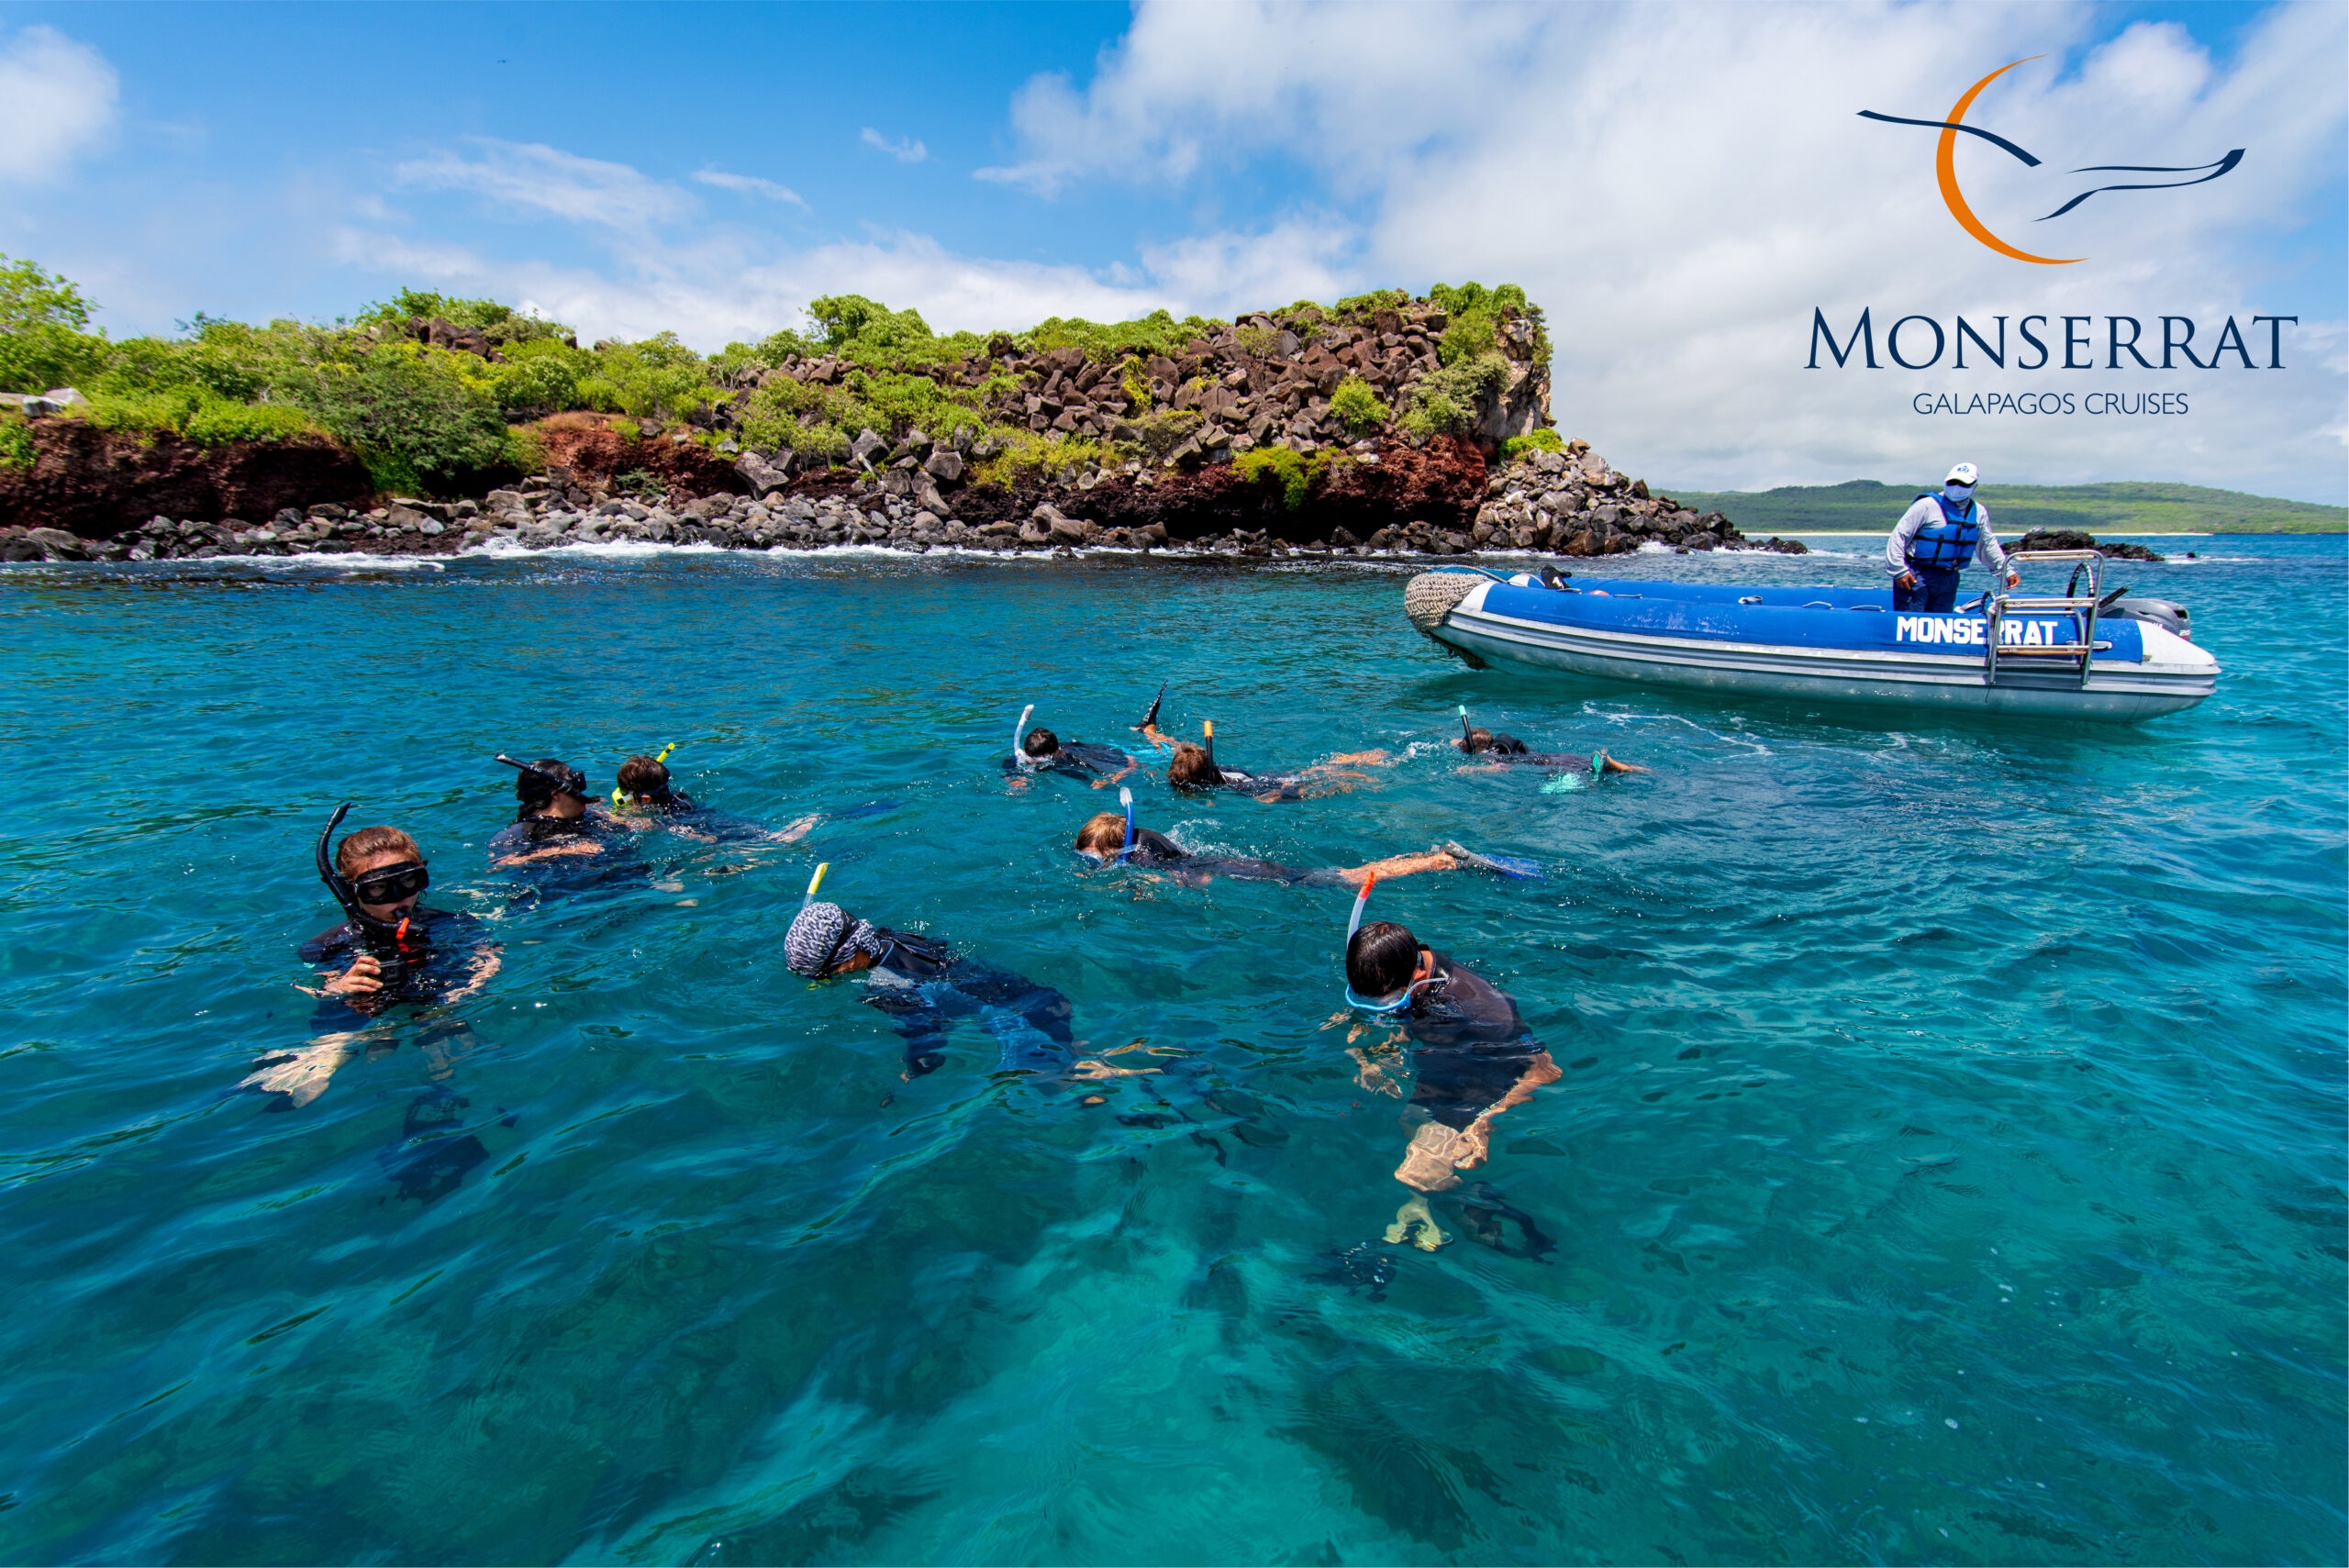 Monserrat Galapagos Cruises Guest Experience 7 High Res scaled